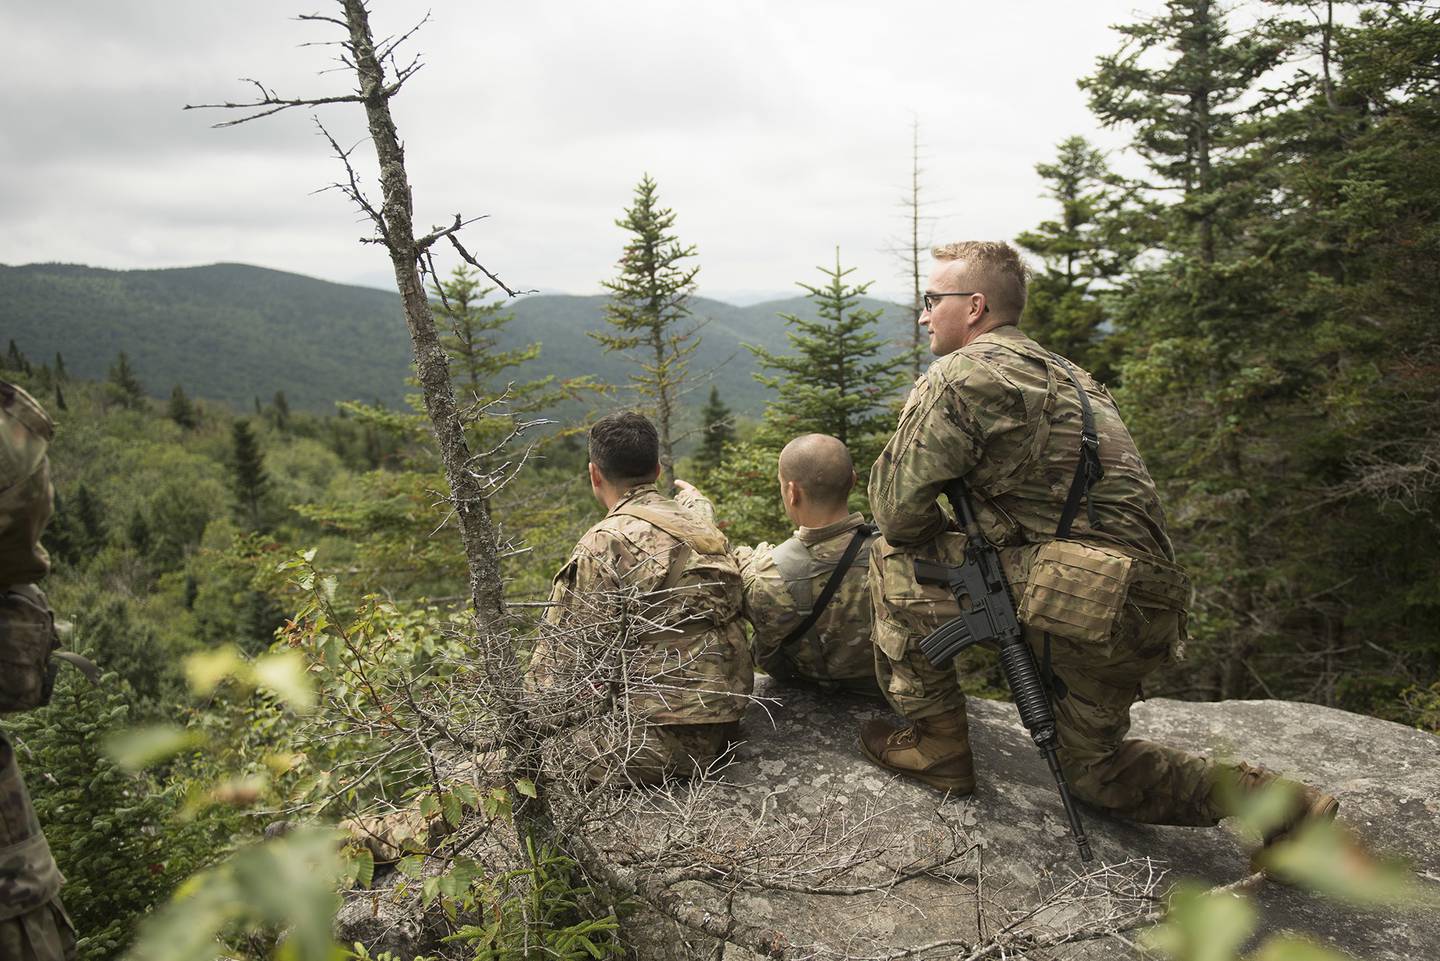 U.S. Army soldiers, Headquarters and Headquarters Battery, 2nd Battalion, 32nd Field Artillery Regiment, 101st Airborne Division, look for potential shooting positions during the Mountain Planners Course, Camp Ethan Allen Training Site, Jericho, Vt., Aug. 2, 2018.